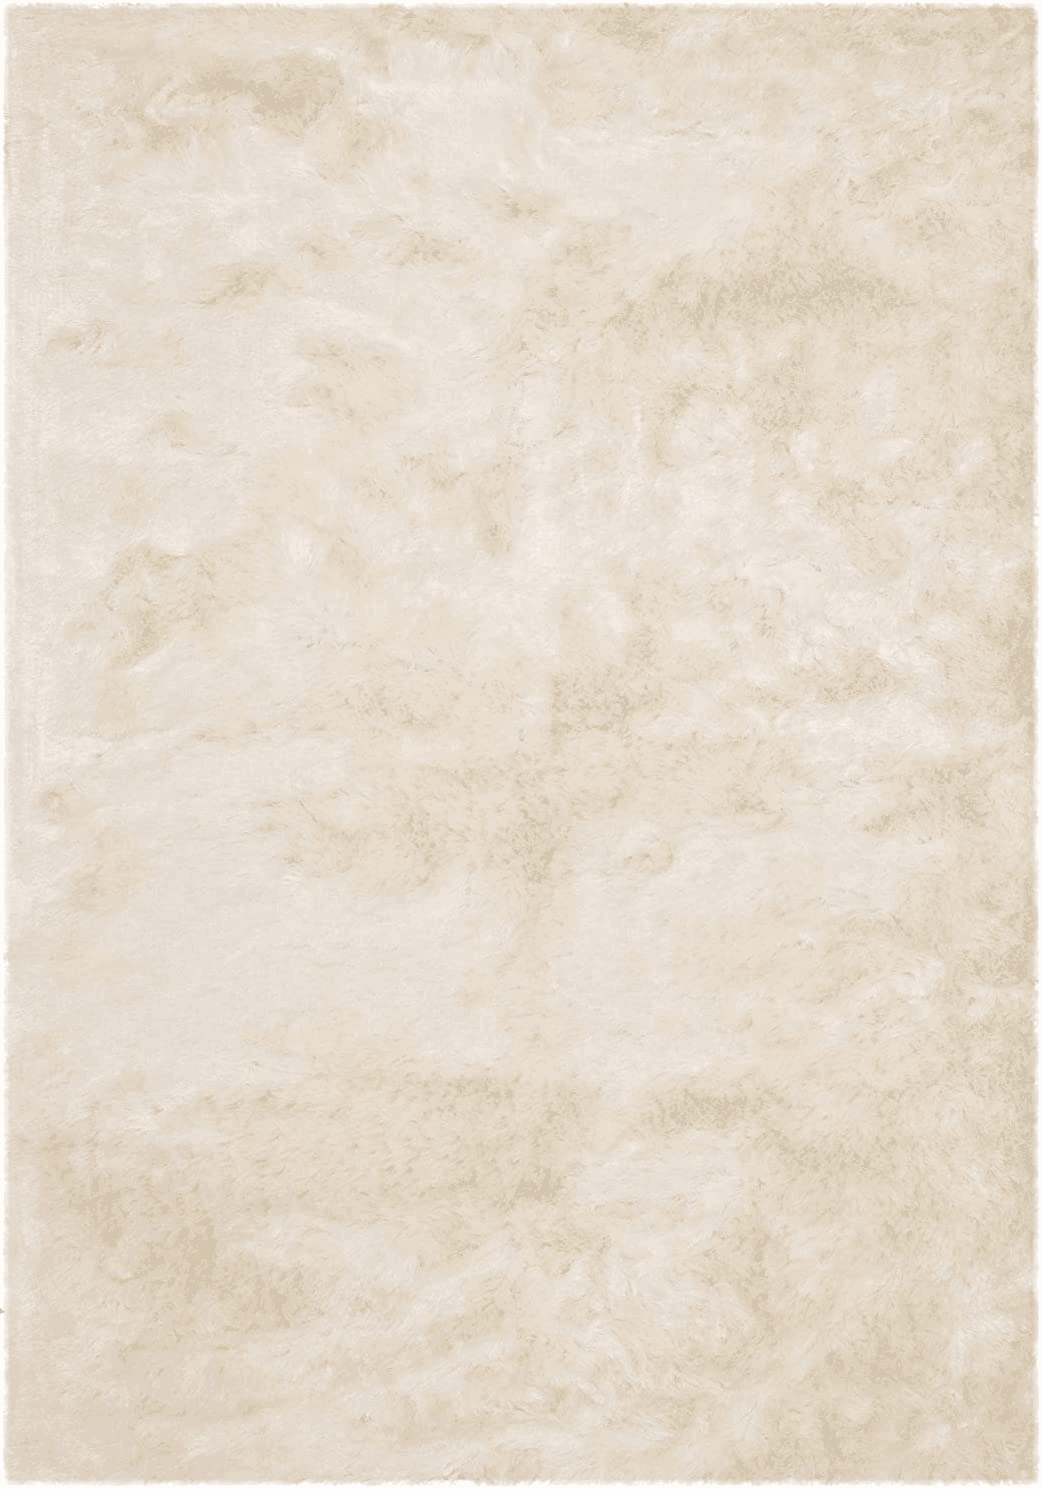 2.5-inch Thick Accent Rug